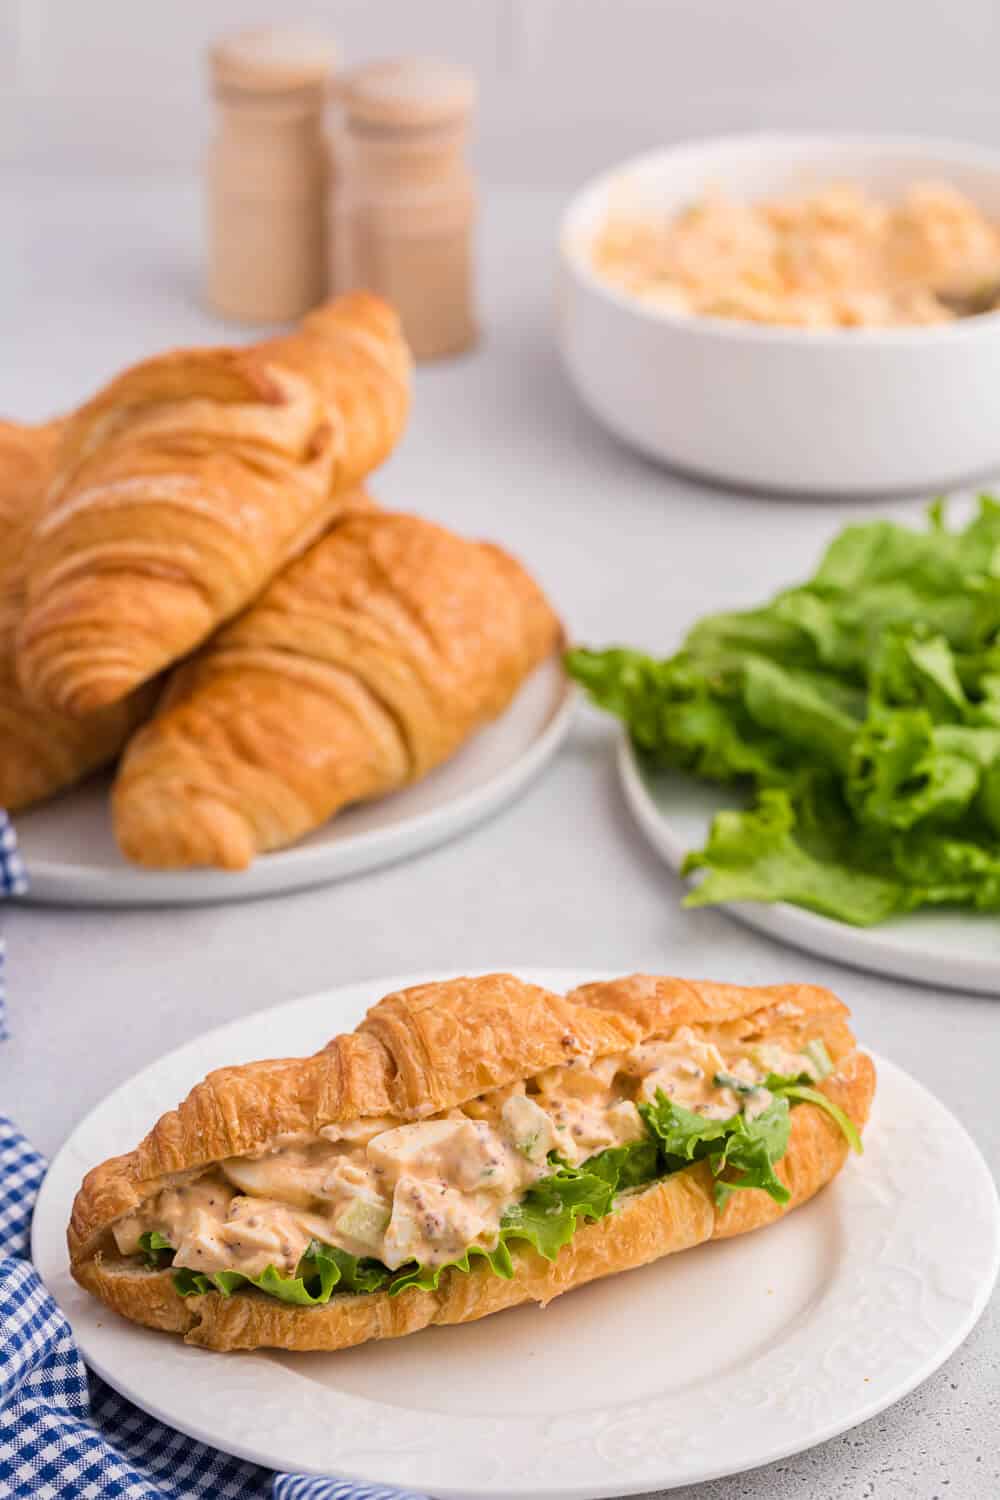 Egg salad on a croissant with lettuce.